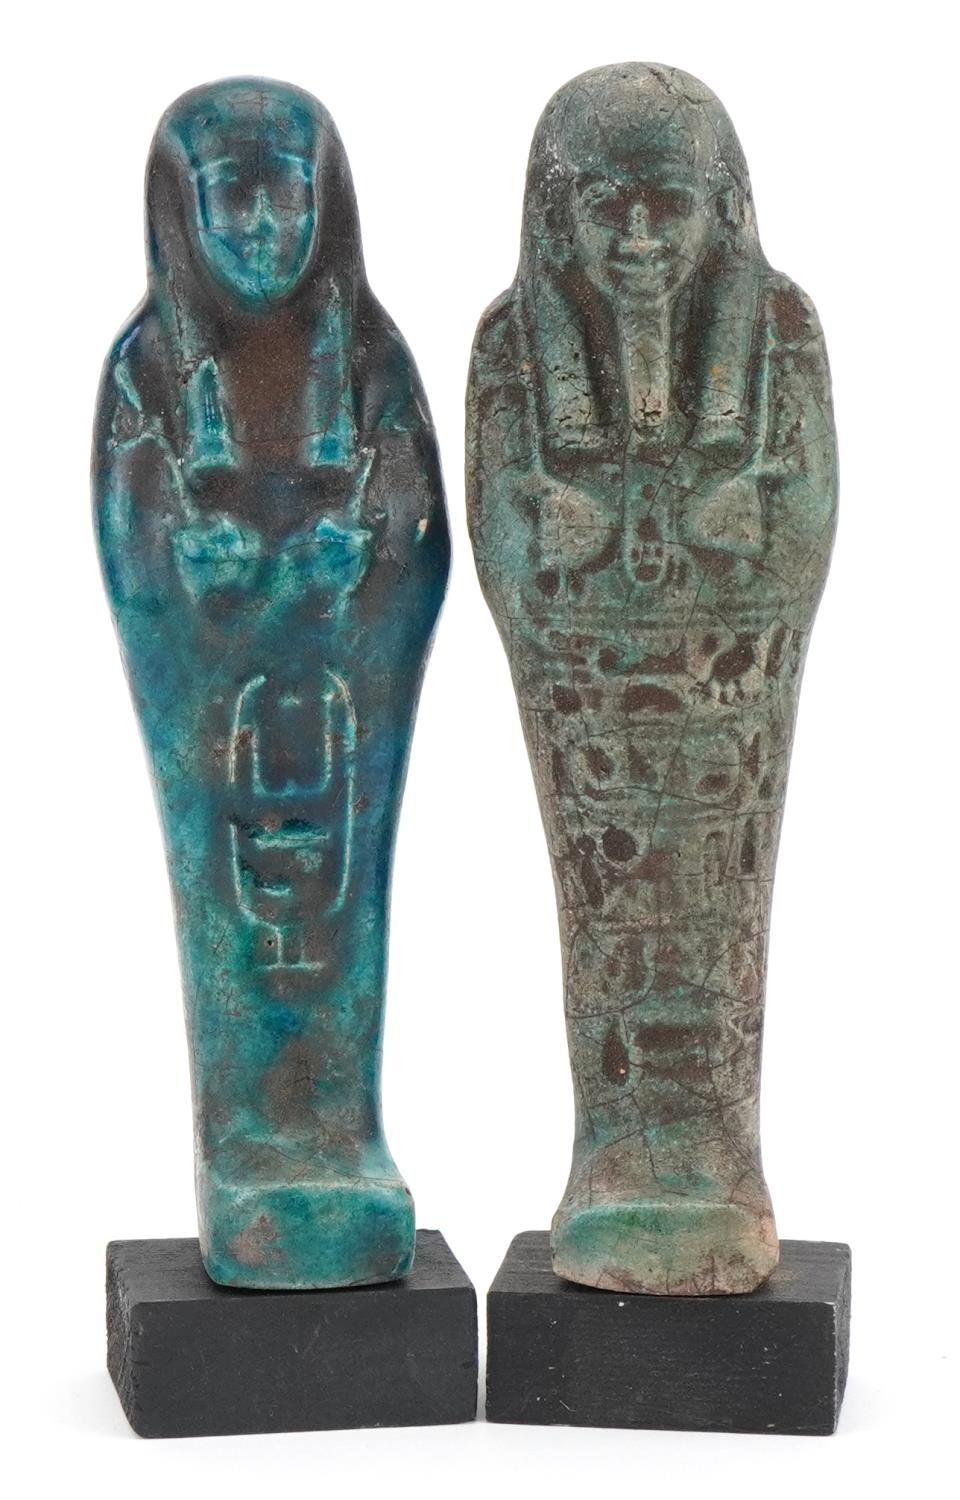 Two Egyptian style shabtis raised on painted wooden block bases, each 18.5cm high